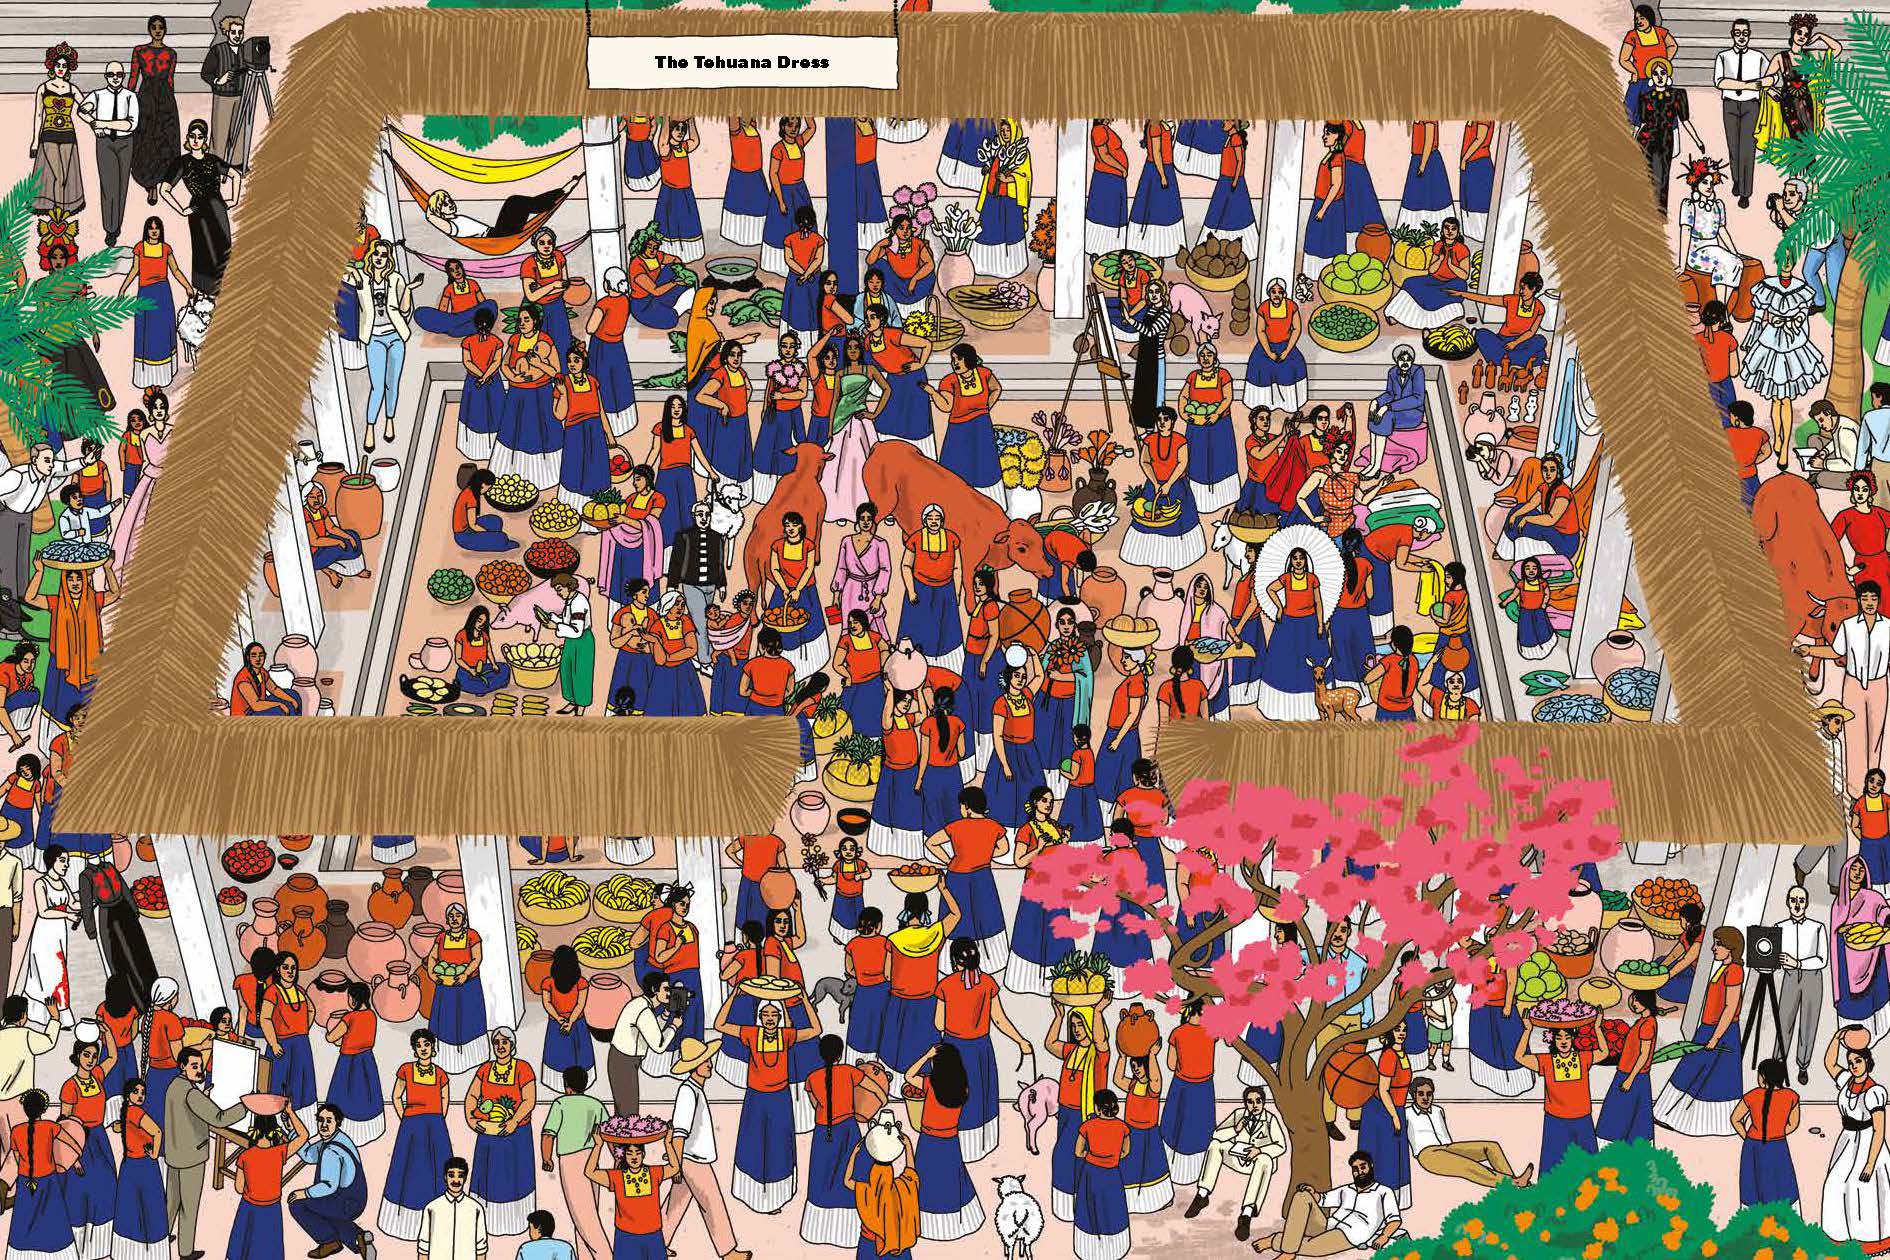 1594071539545 find frida 4 the tehuana dress - where's frida? This illustrated book will put your eyes to the test